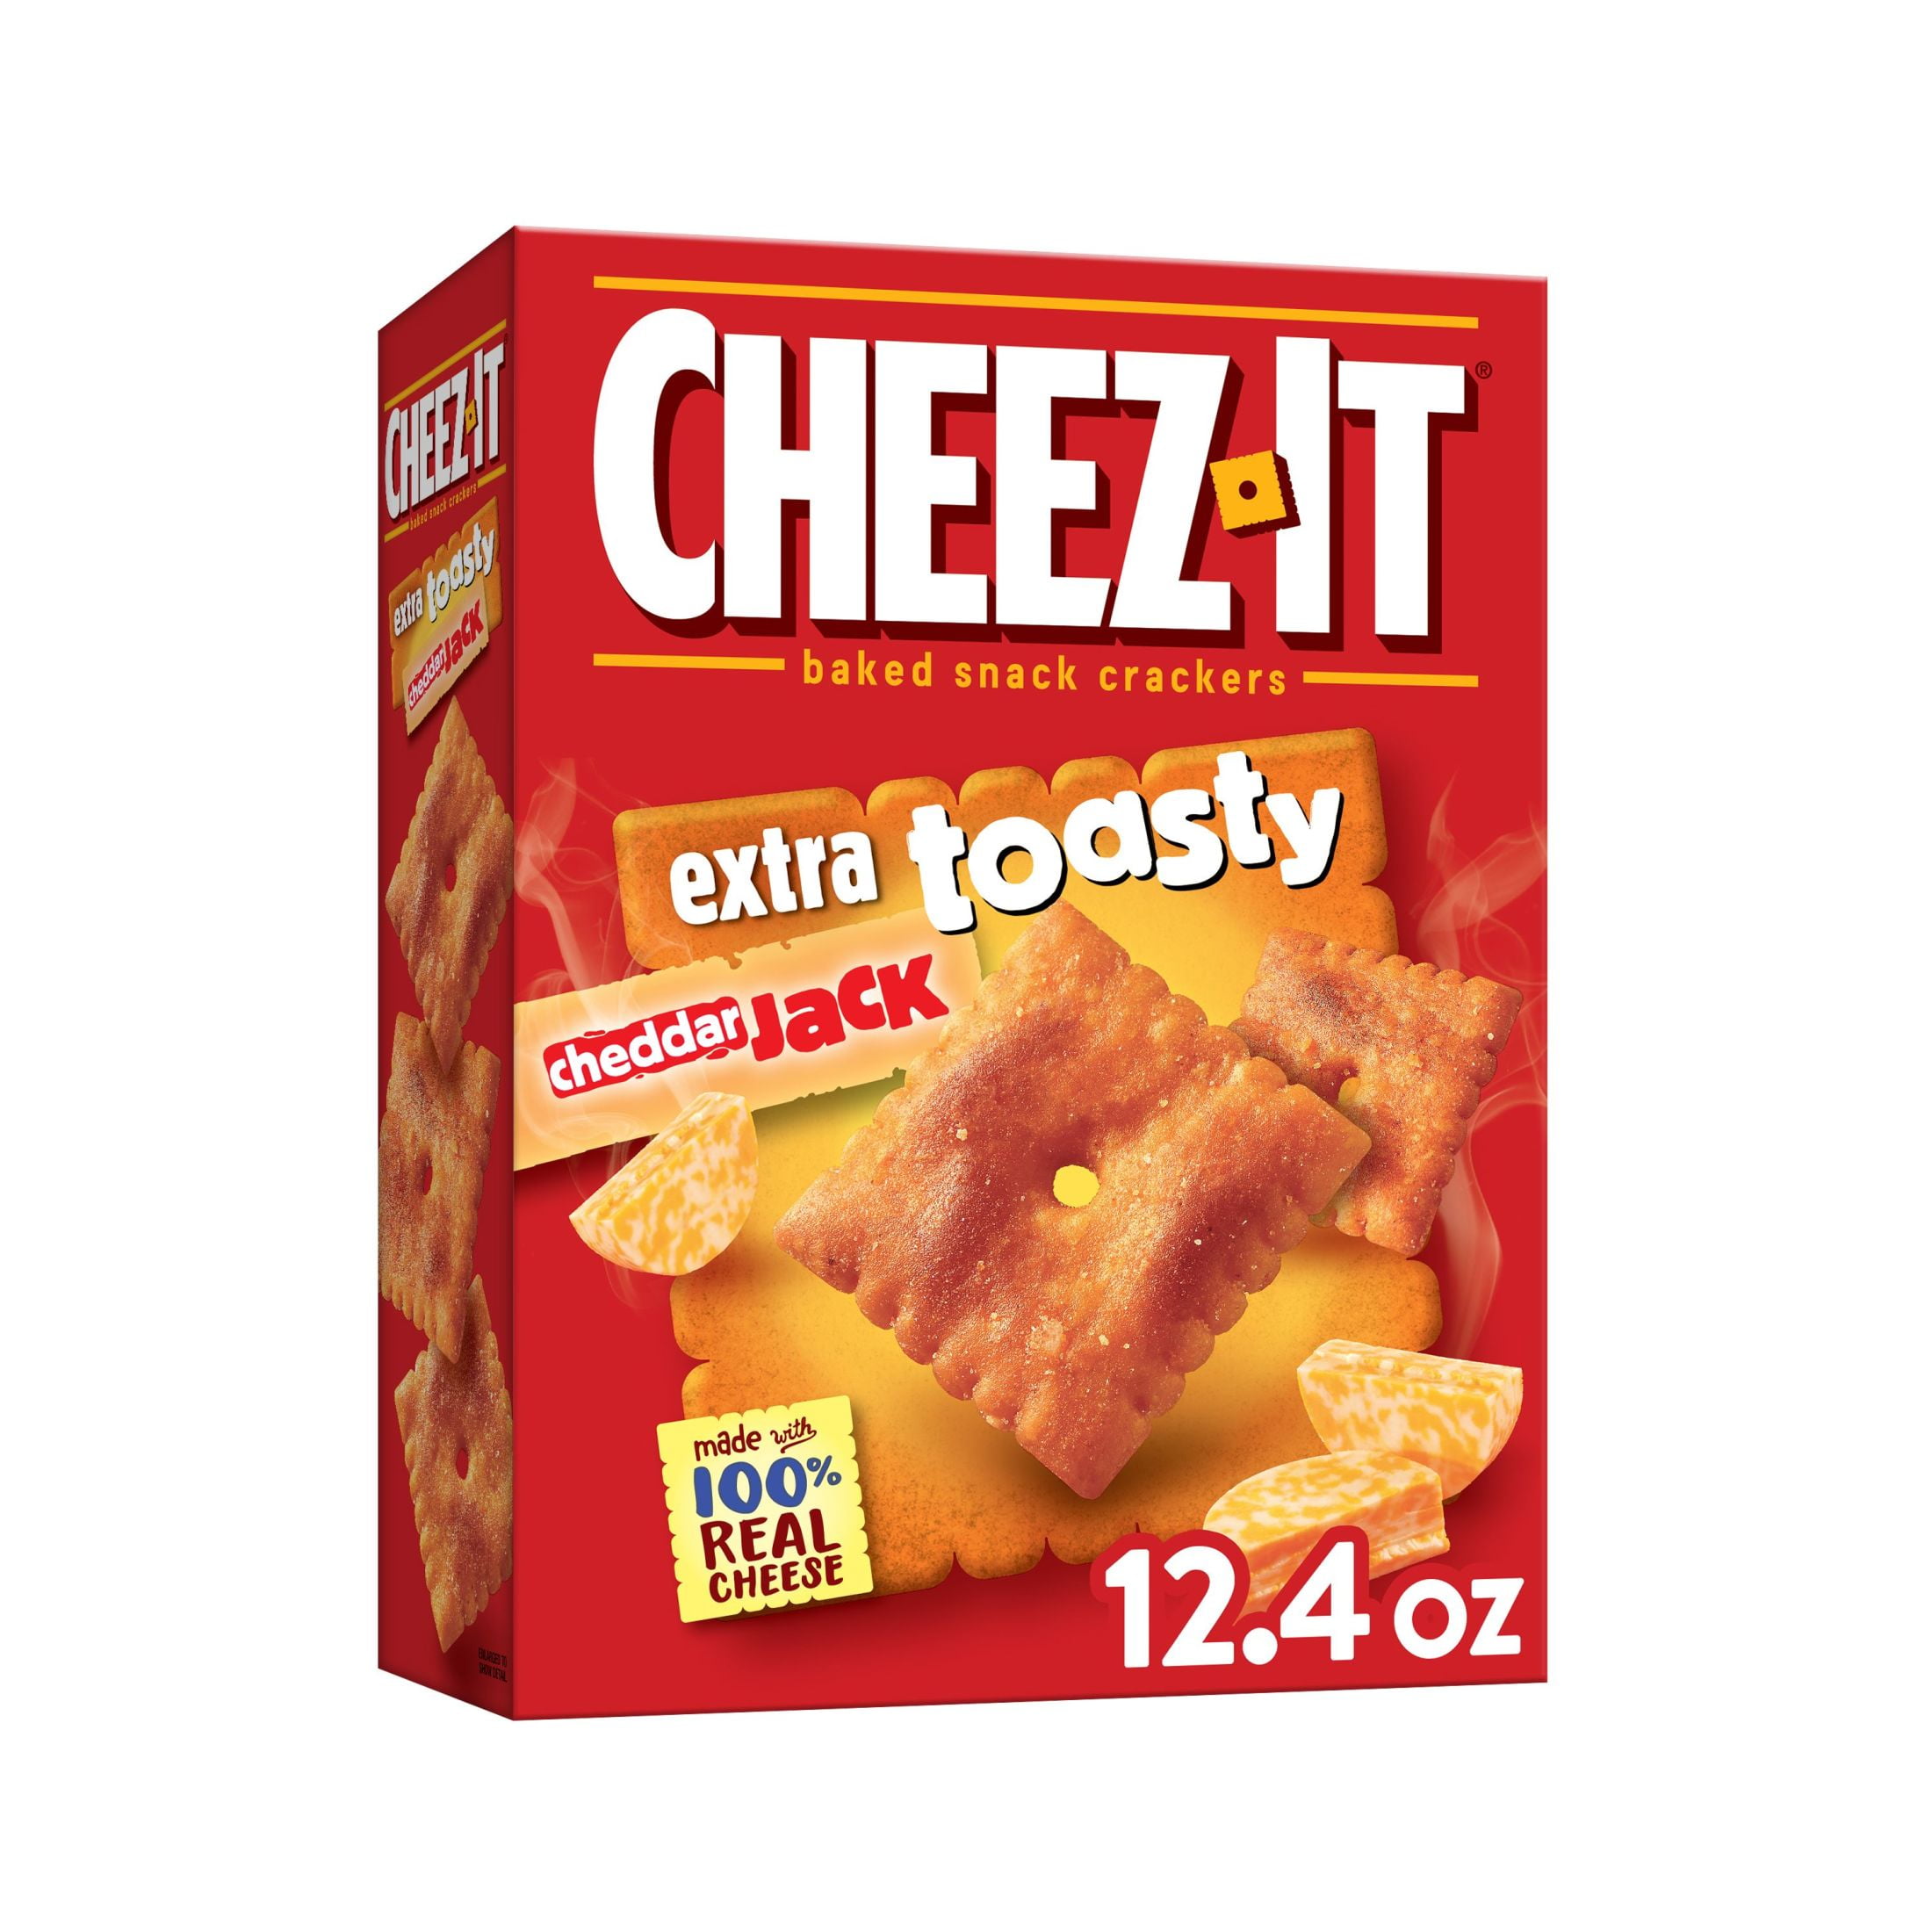 Cheez-It Extra Toasty Cheddar Jack Cheese Crackers, Peanut-Free, 12.4 ...